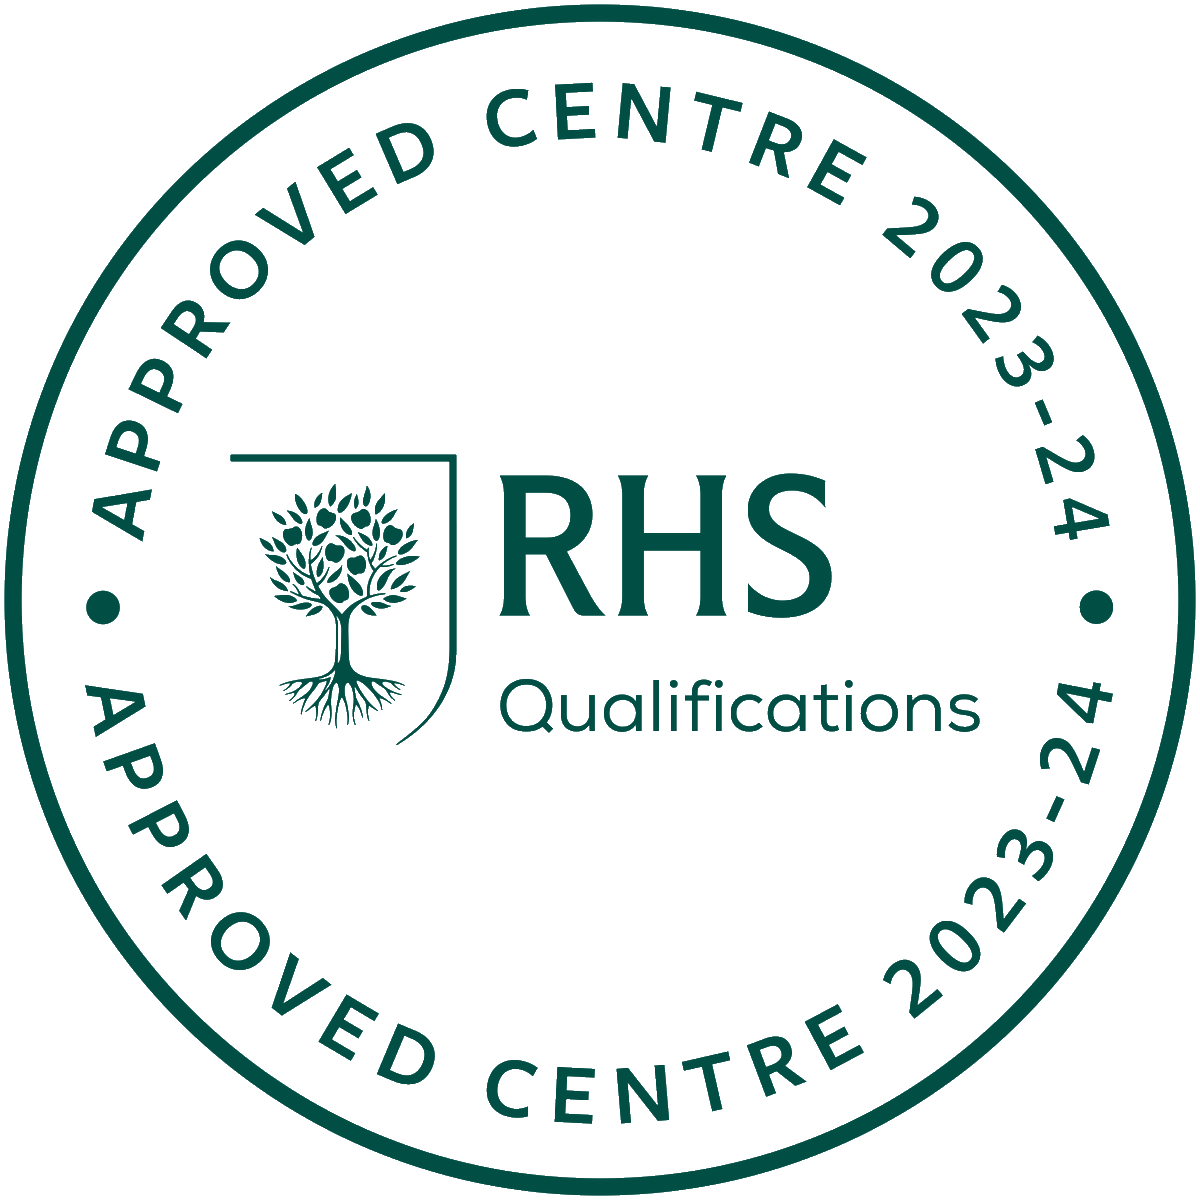 Leafy Learning has just been approved as a distance learning provider for the RHS level 2 theory qualification. We can't wait to start teaching new students. Enrollment will start 1 Feb 2024. If you are interested contact us via the website: leafylearning.co.uk